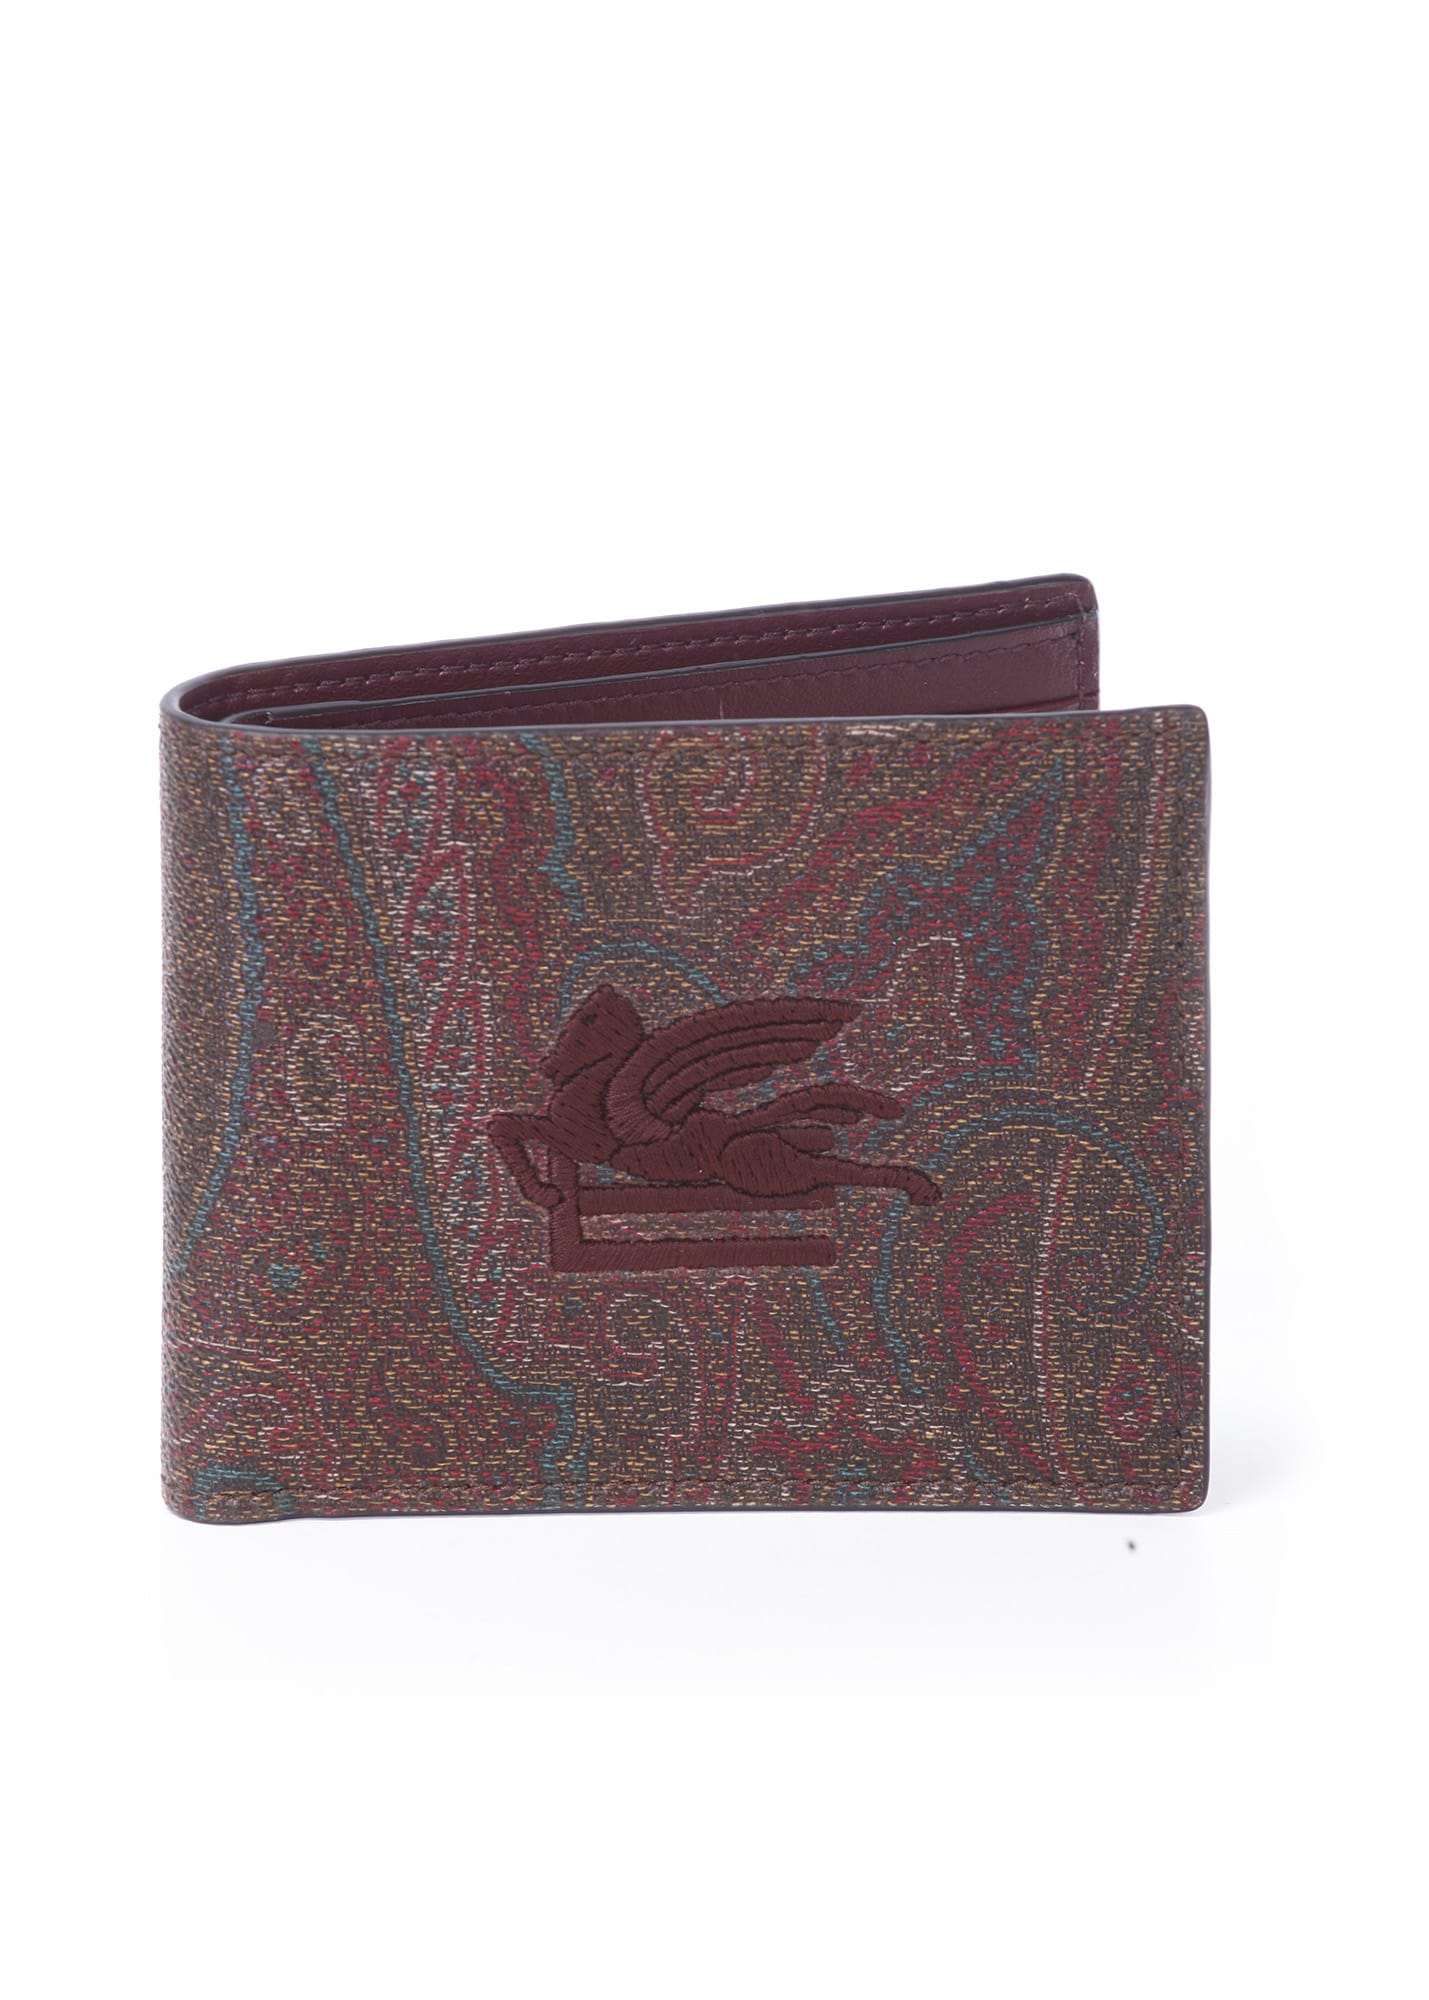 ETRO SMALL WALLET MADE